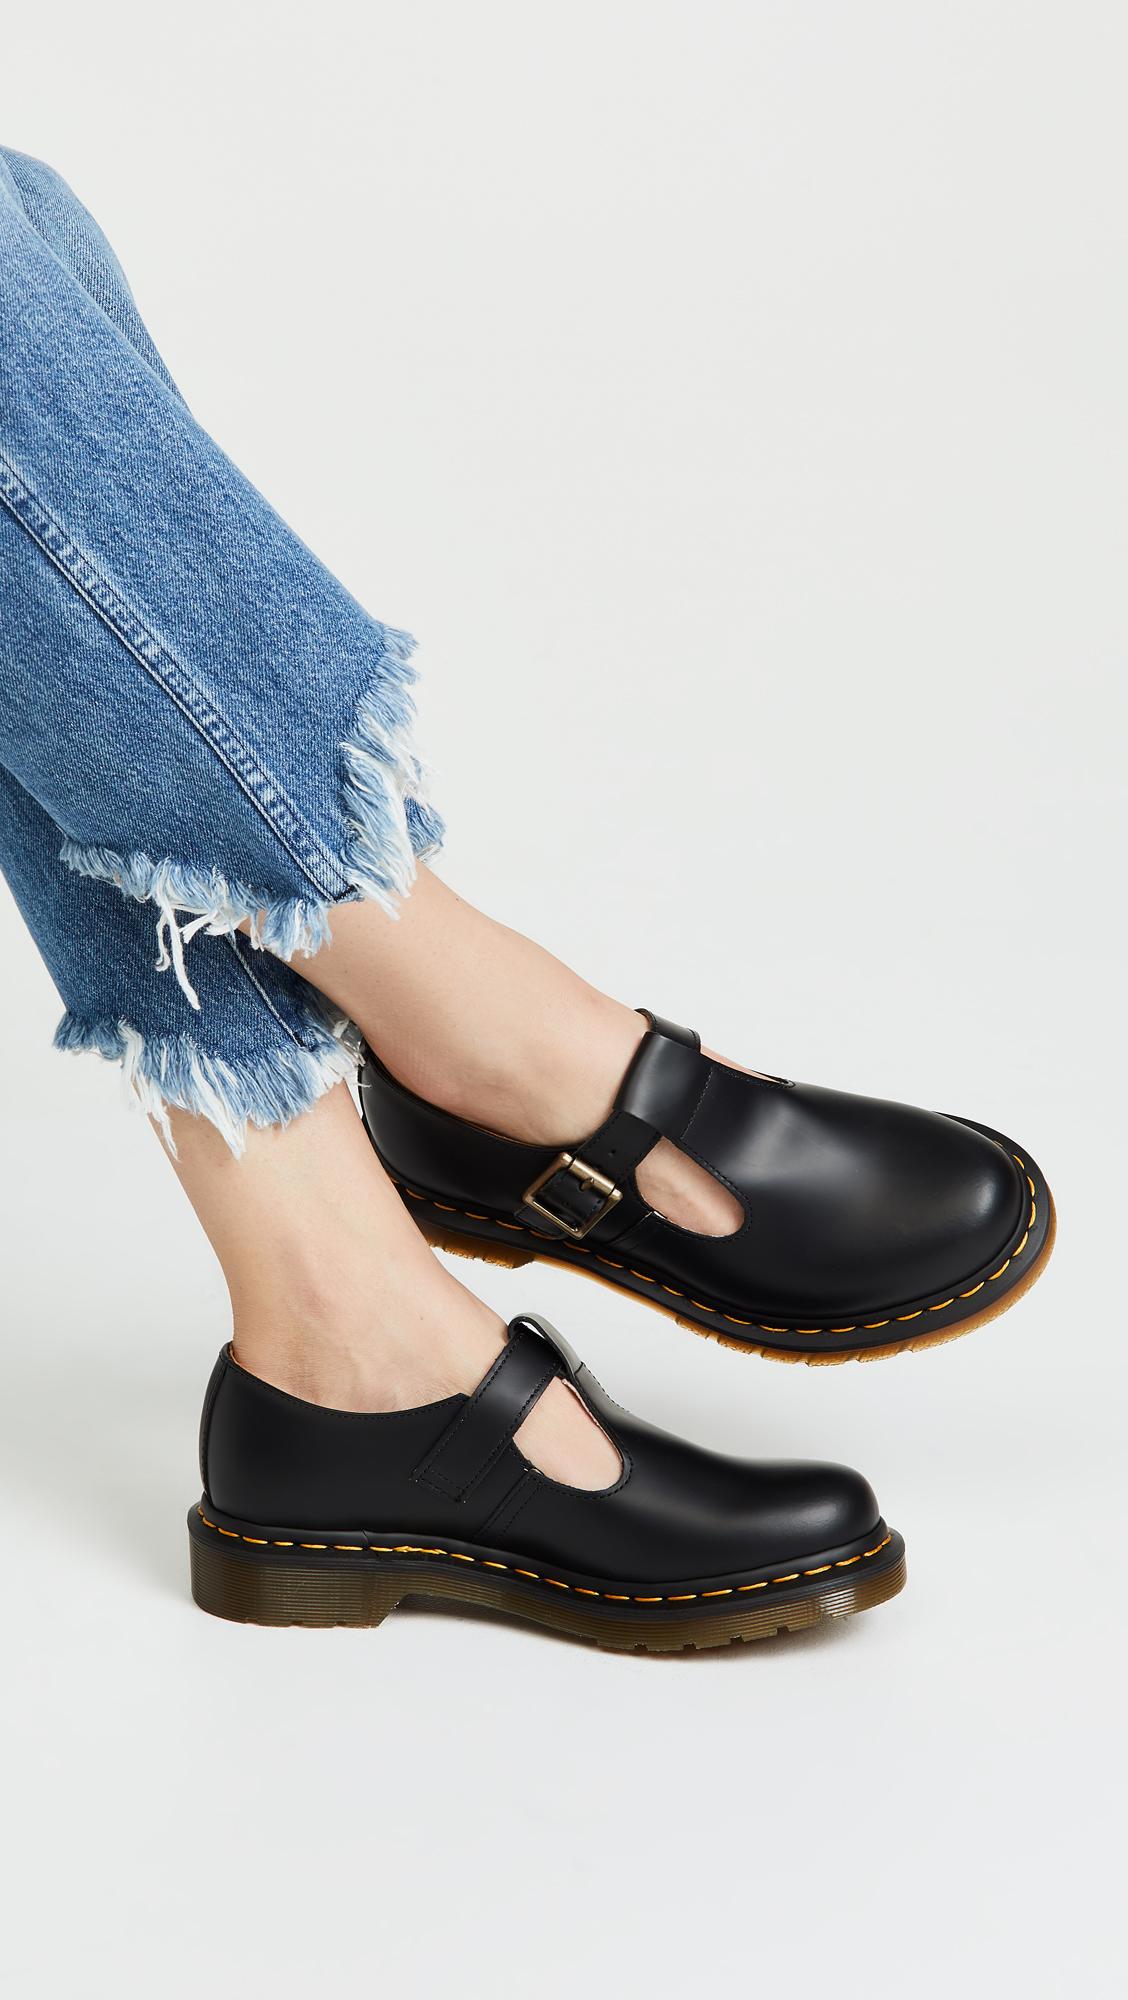 Dr. Martens Polley T-bar Mary Jane Shoes in Black | Lyst